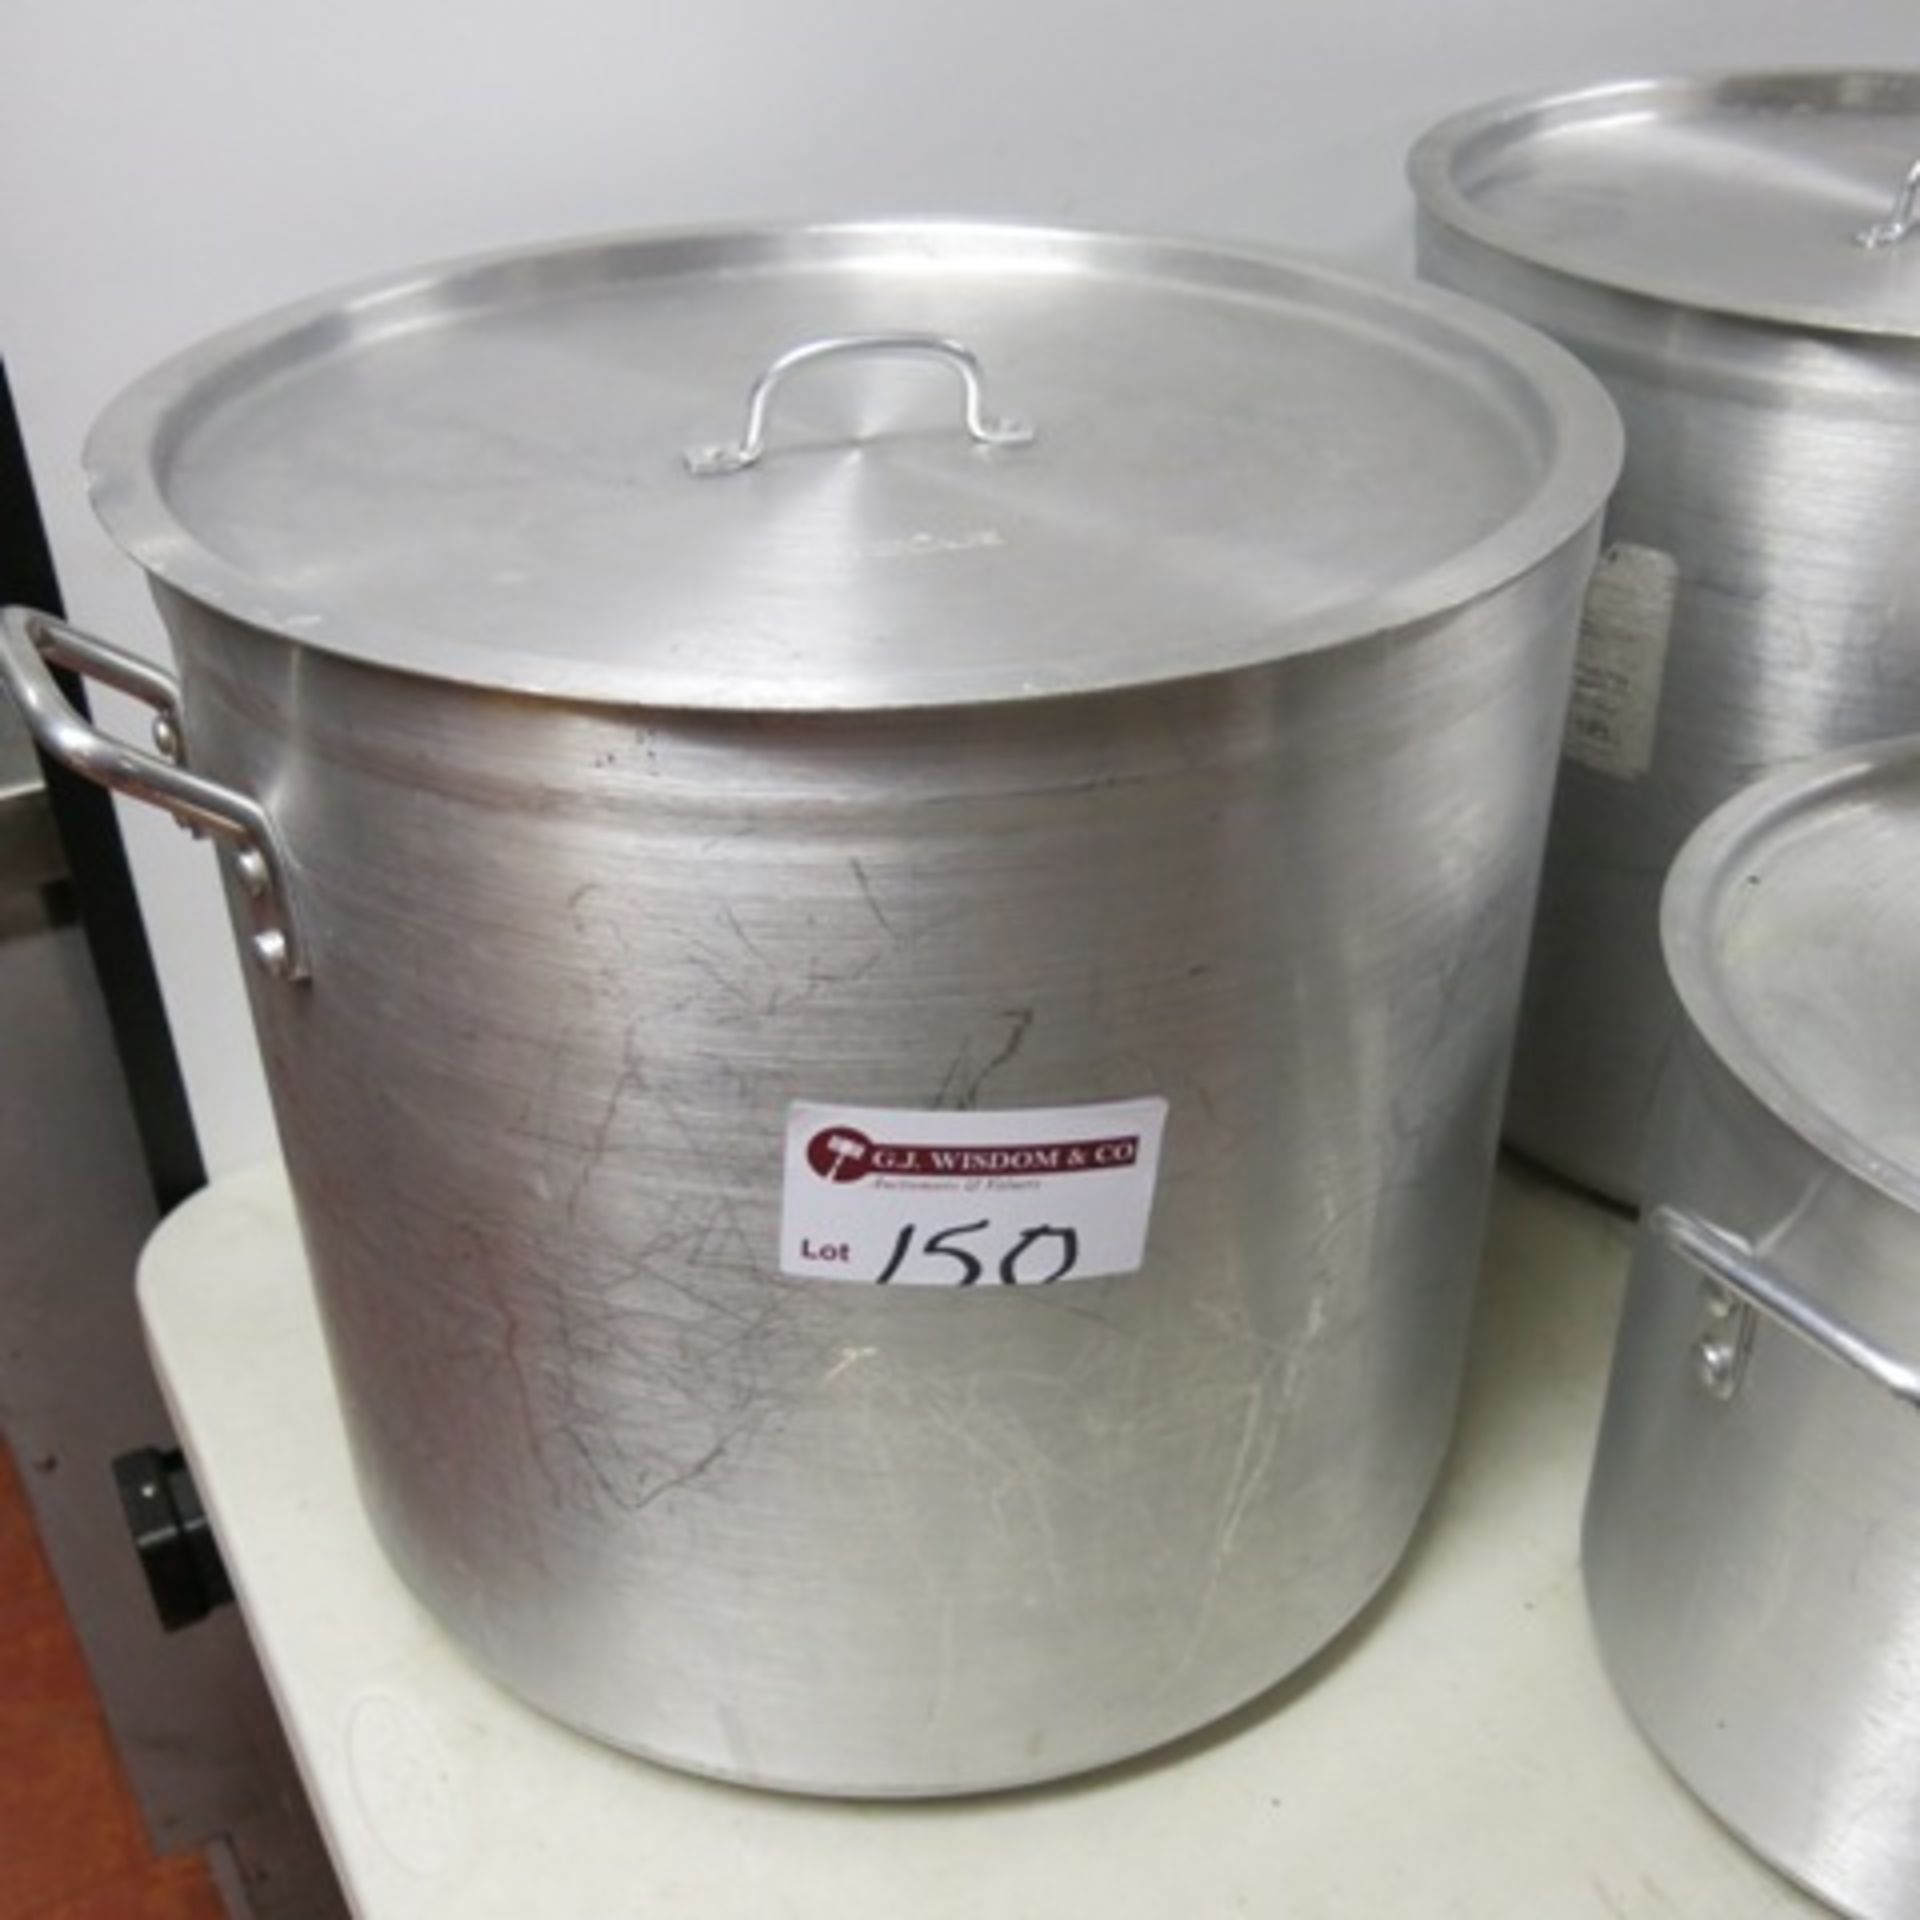 6 x Vogue Assorted Sized Aluminium Stock Pots with 4 Lids - Image 4 of 6